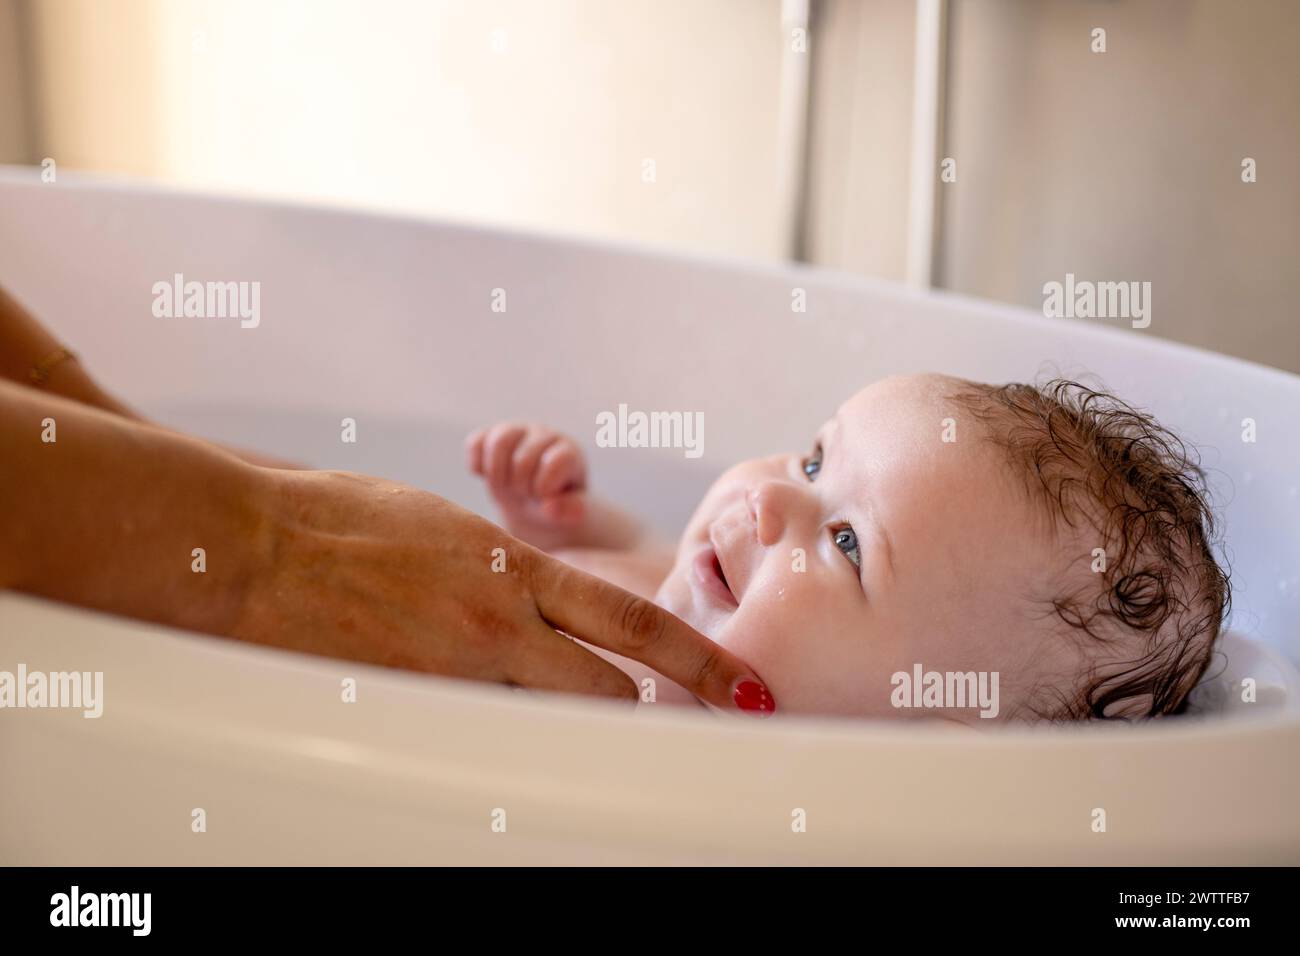 A baby enjoying bath time, gazing up with a look of contentment. Stock Photo